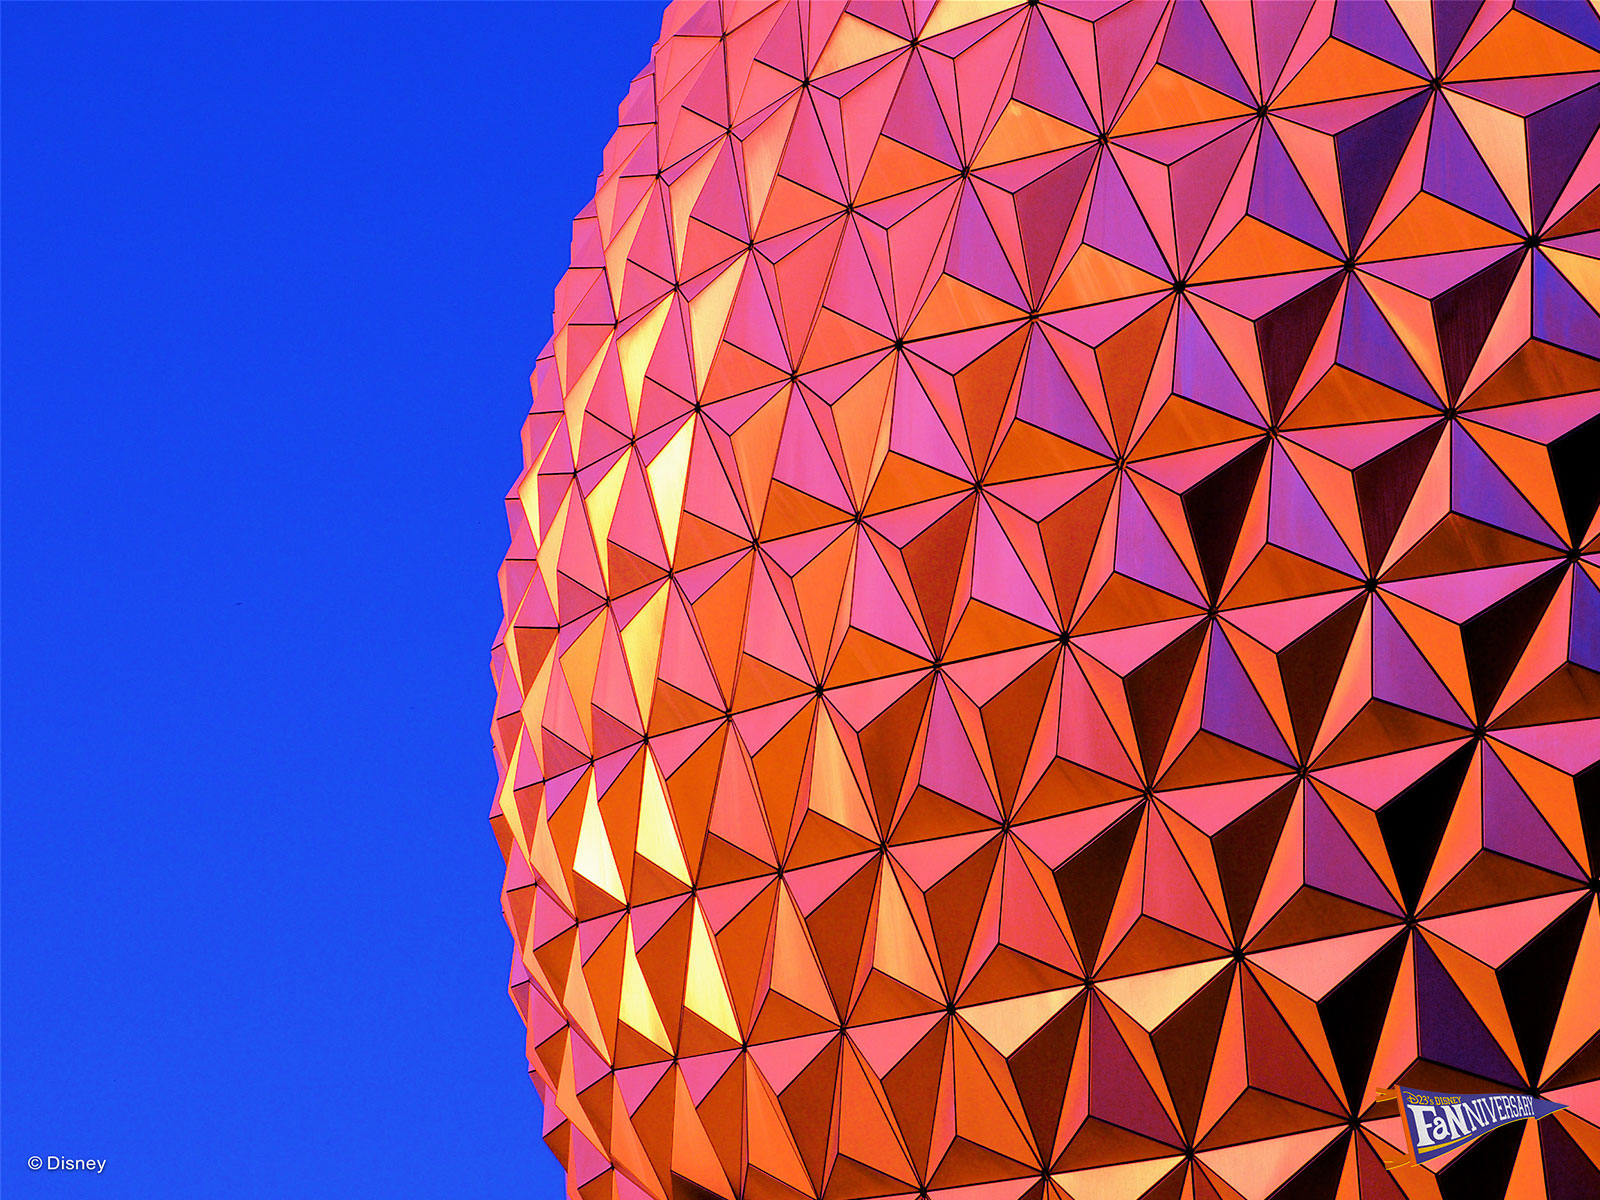 Dreamy Epcot Wallpaper For Your Phone Or Desktop Tablet D23